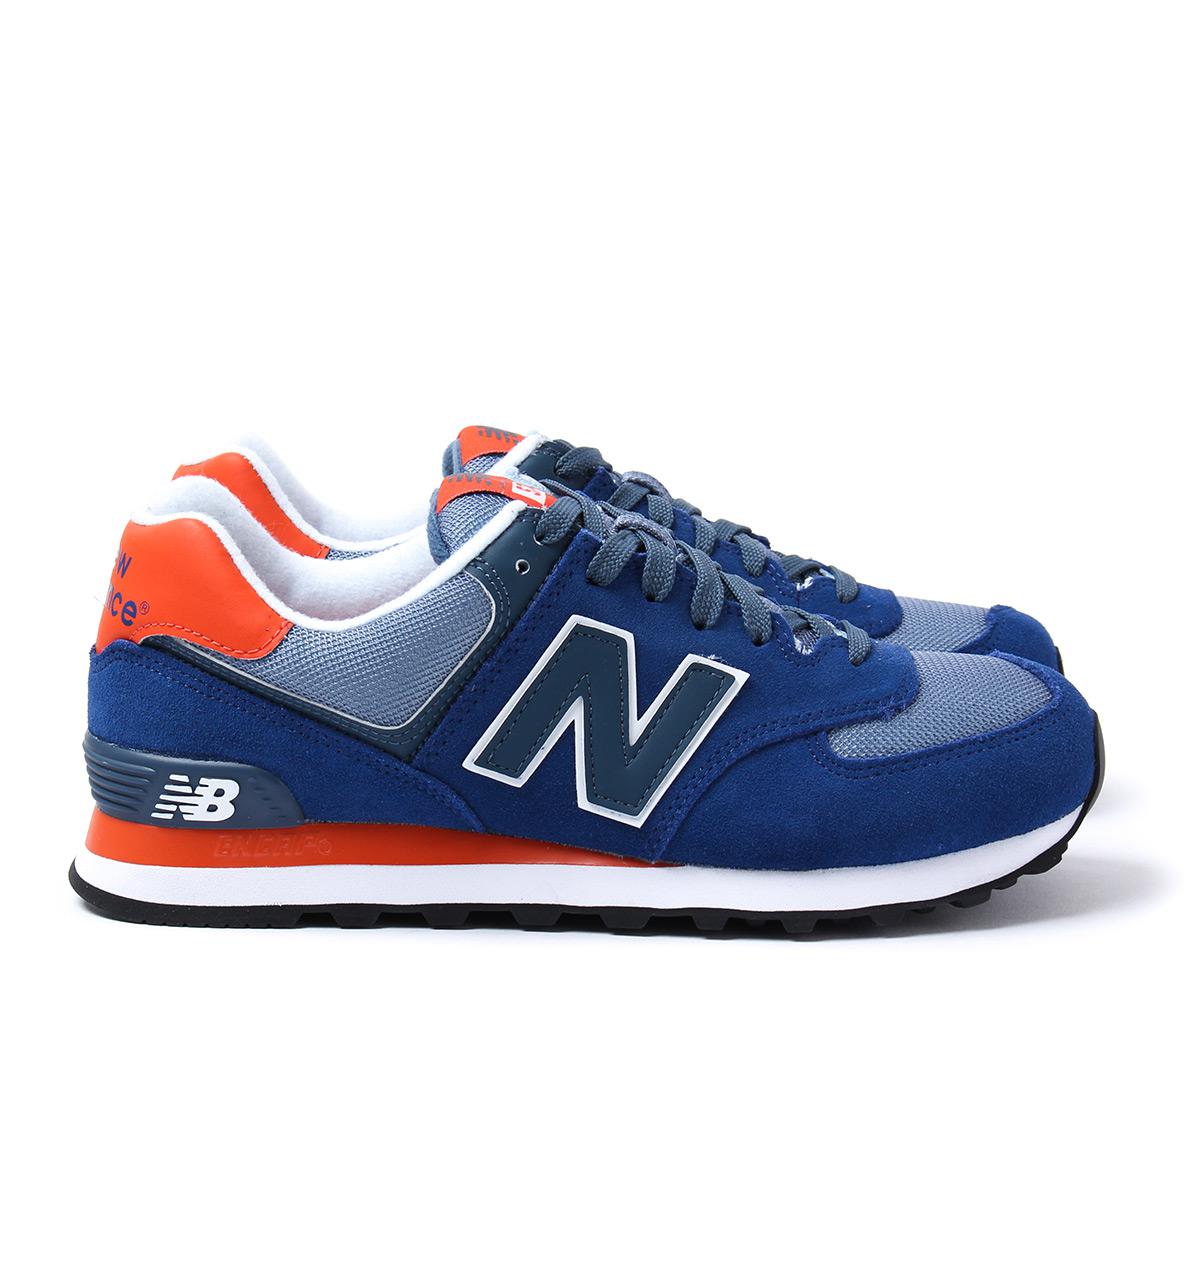 New Balance 574 Royal Blue & Orange Suede Trainers for Men - Lyst